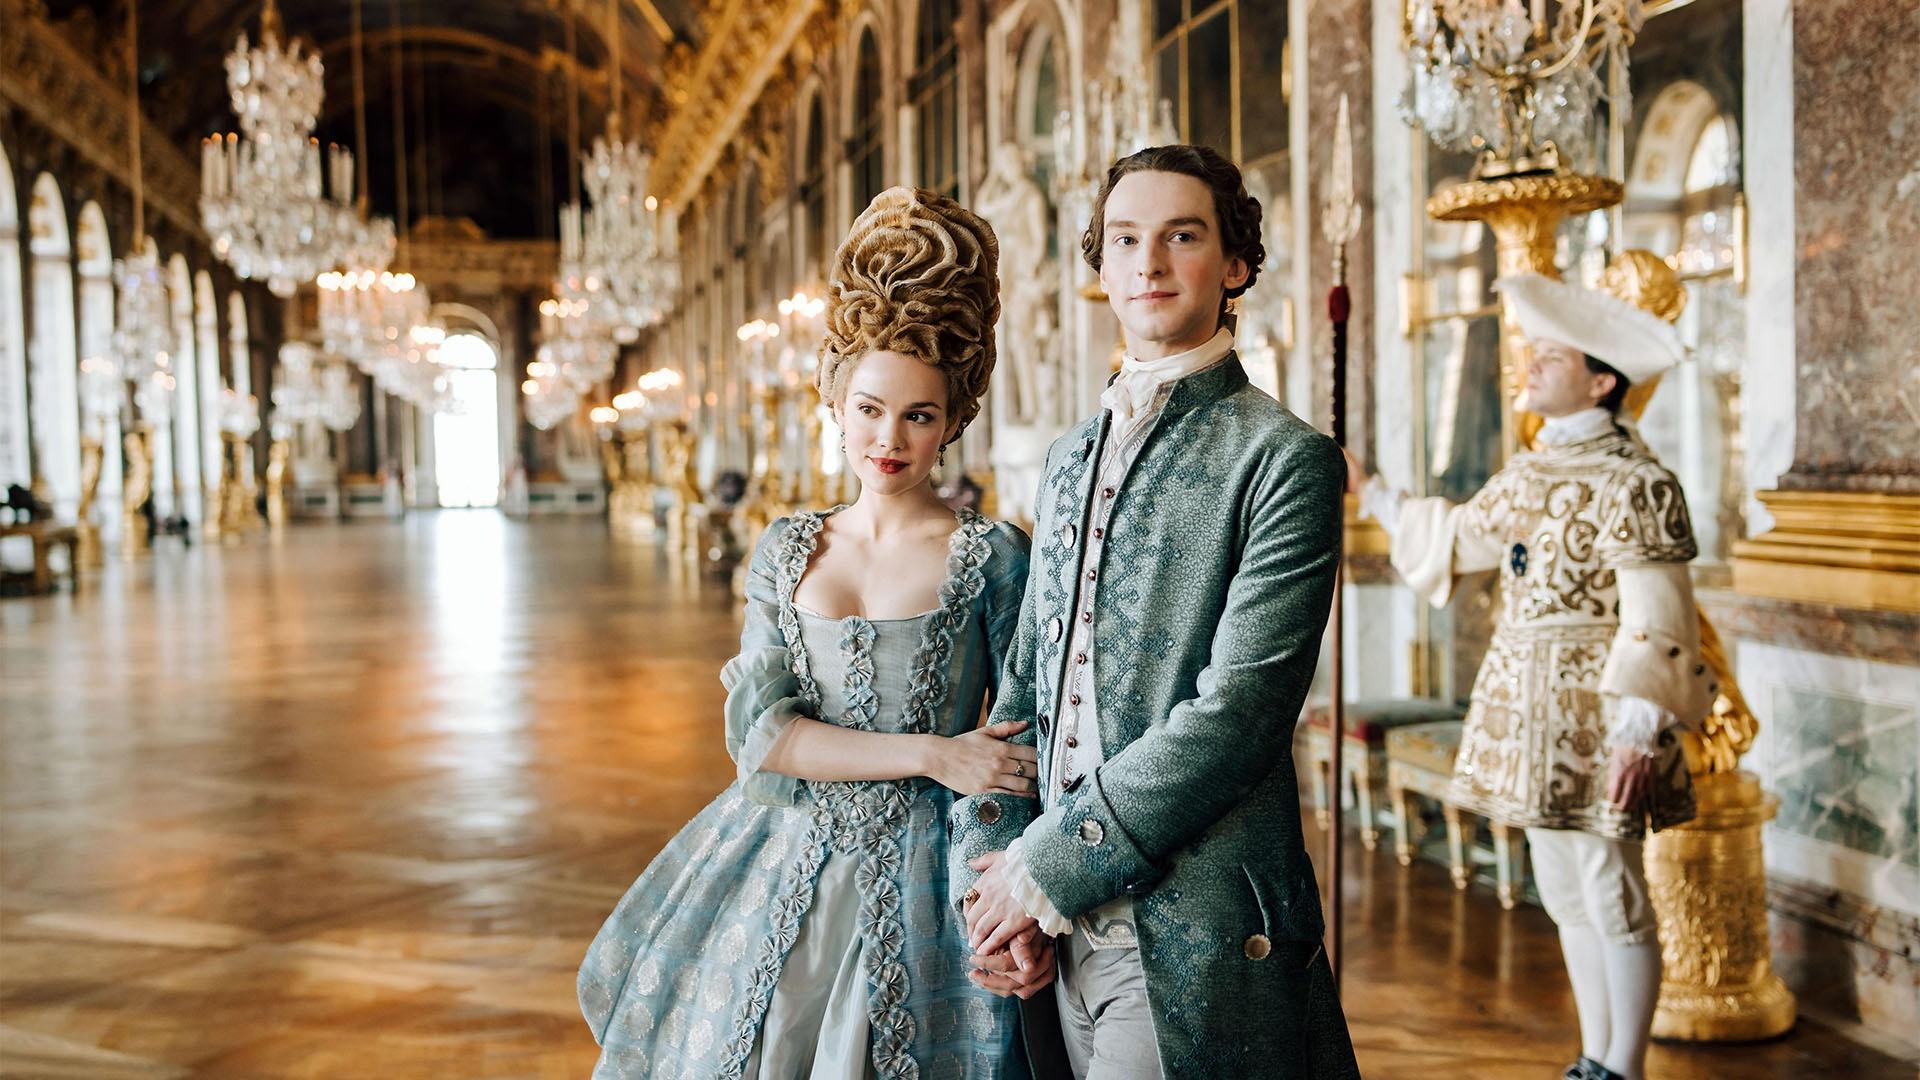 Marie Antoinette, played by actress Emilia Schüle, and Louis, played by actor Louis Cunningham